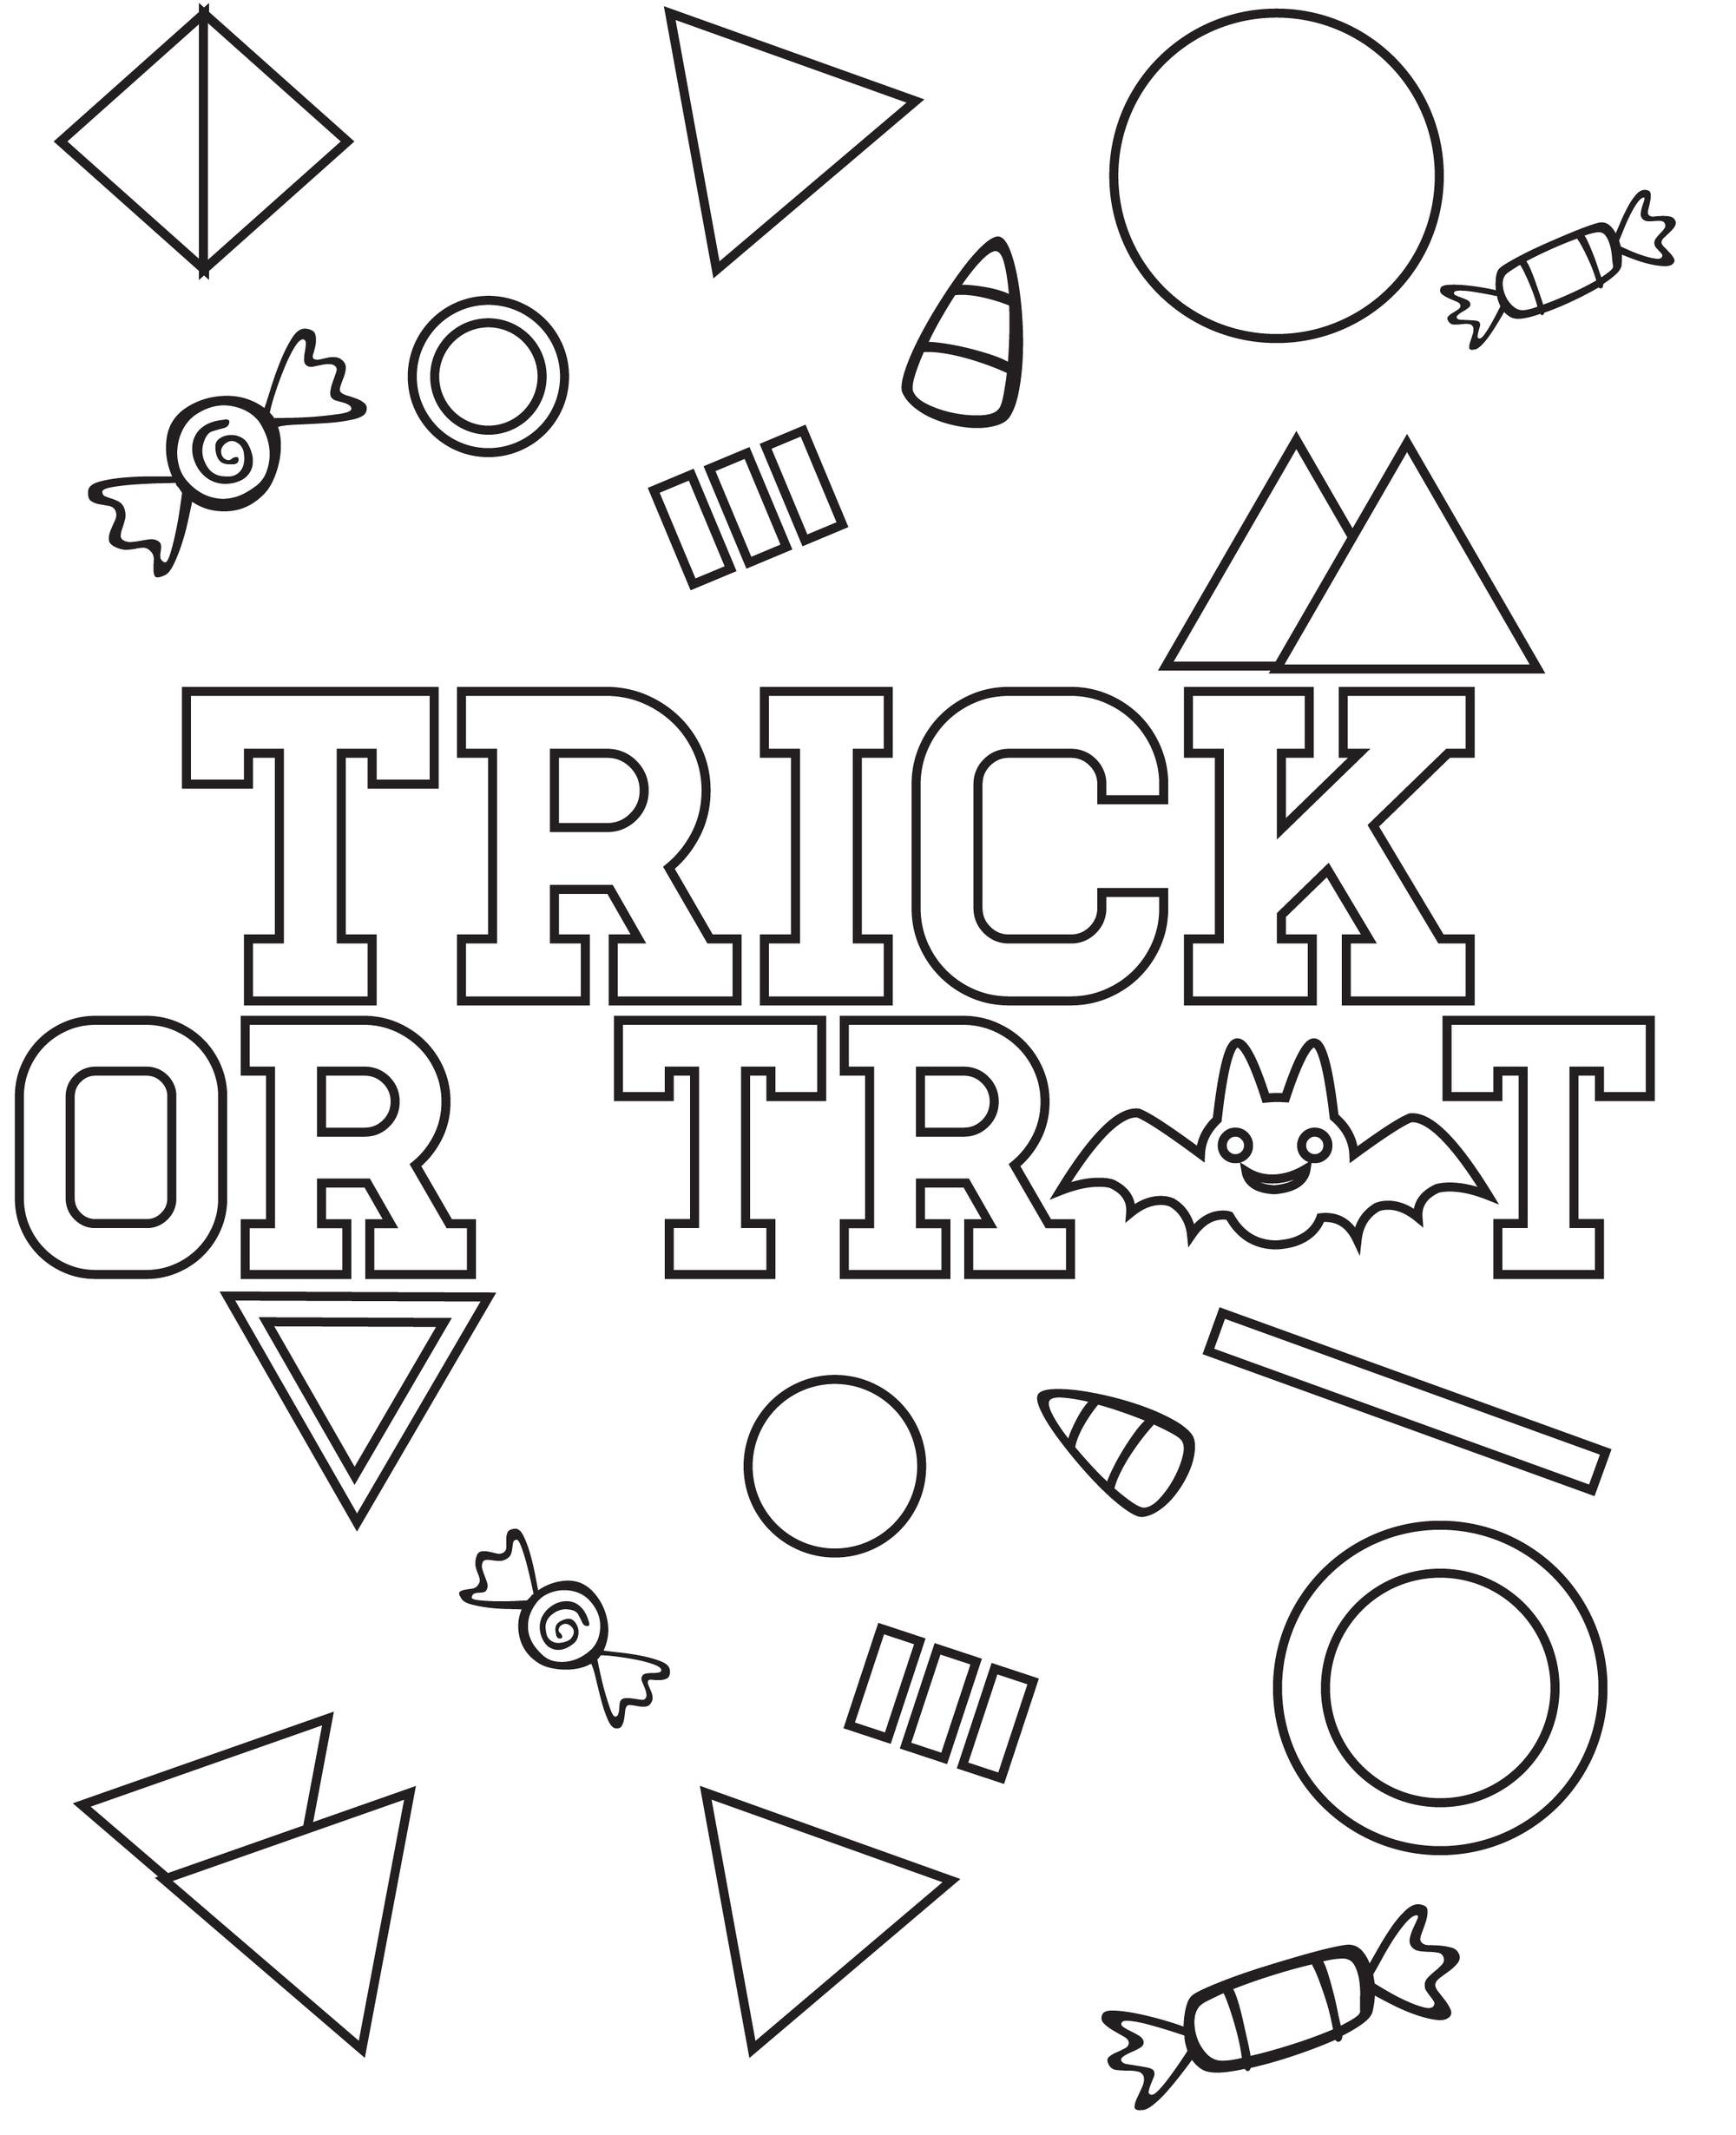 Trick or treat with shapes and rectangles